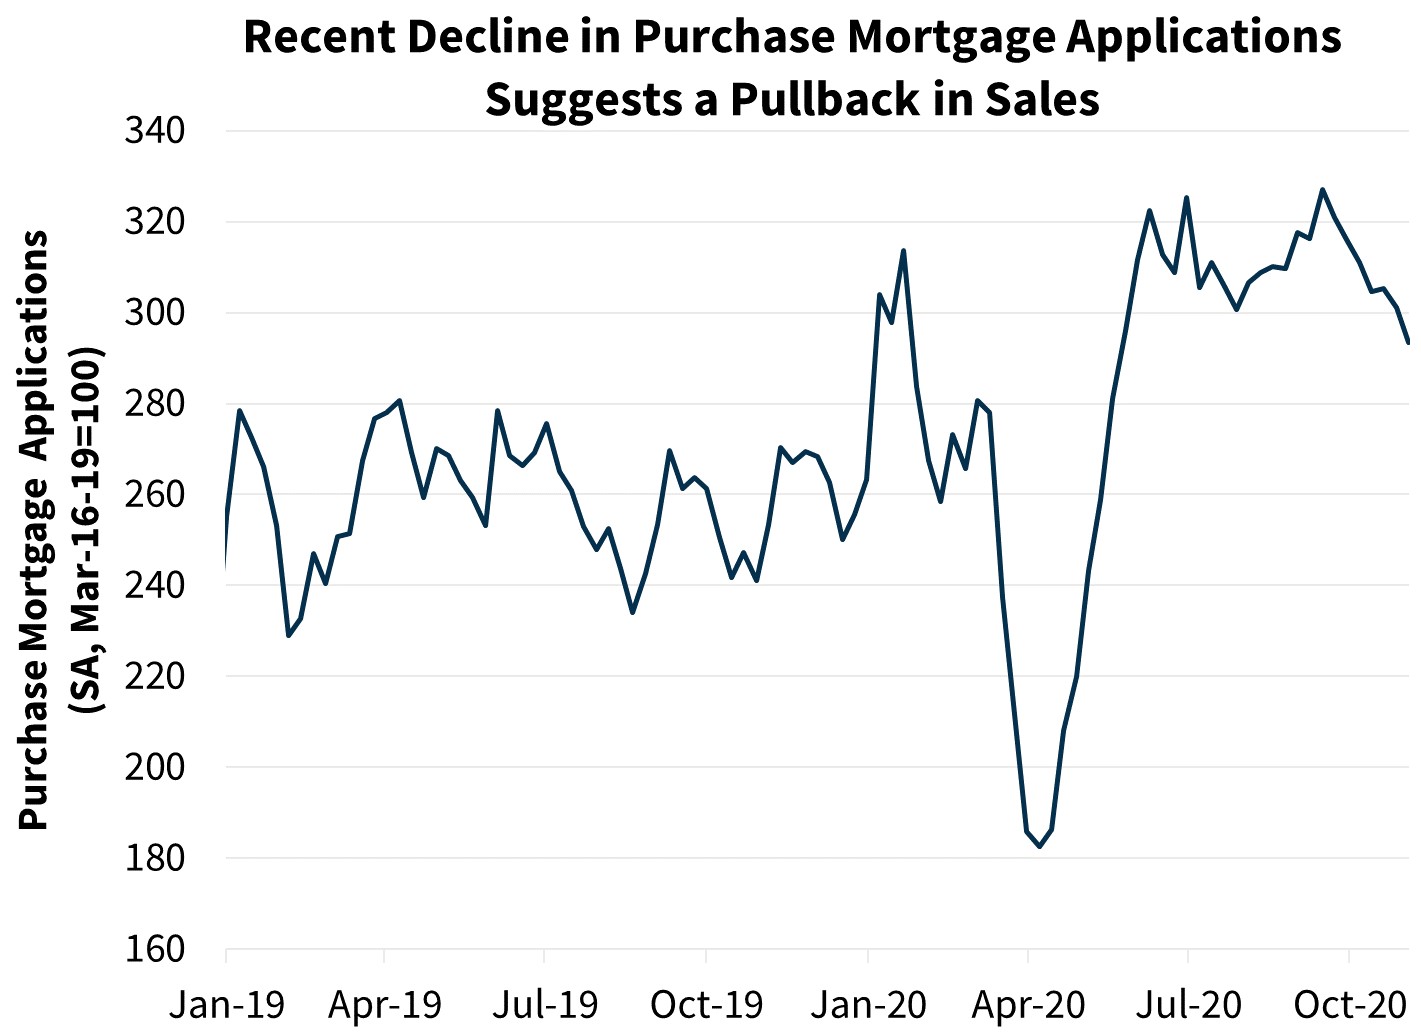  Recent Decline in Purchase Mortgage Applications Suggests a Pullback in Sales
 